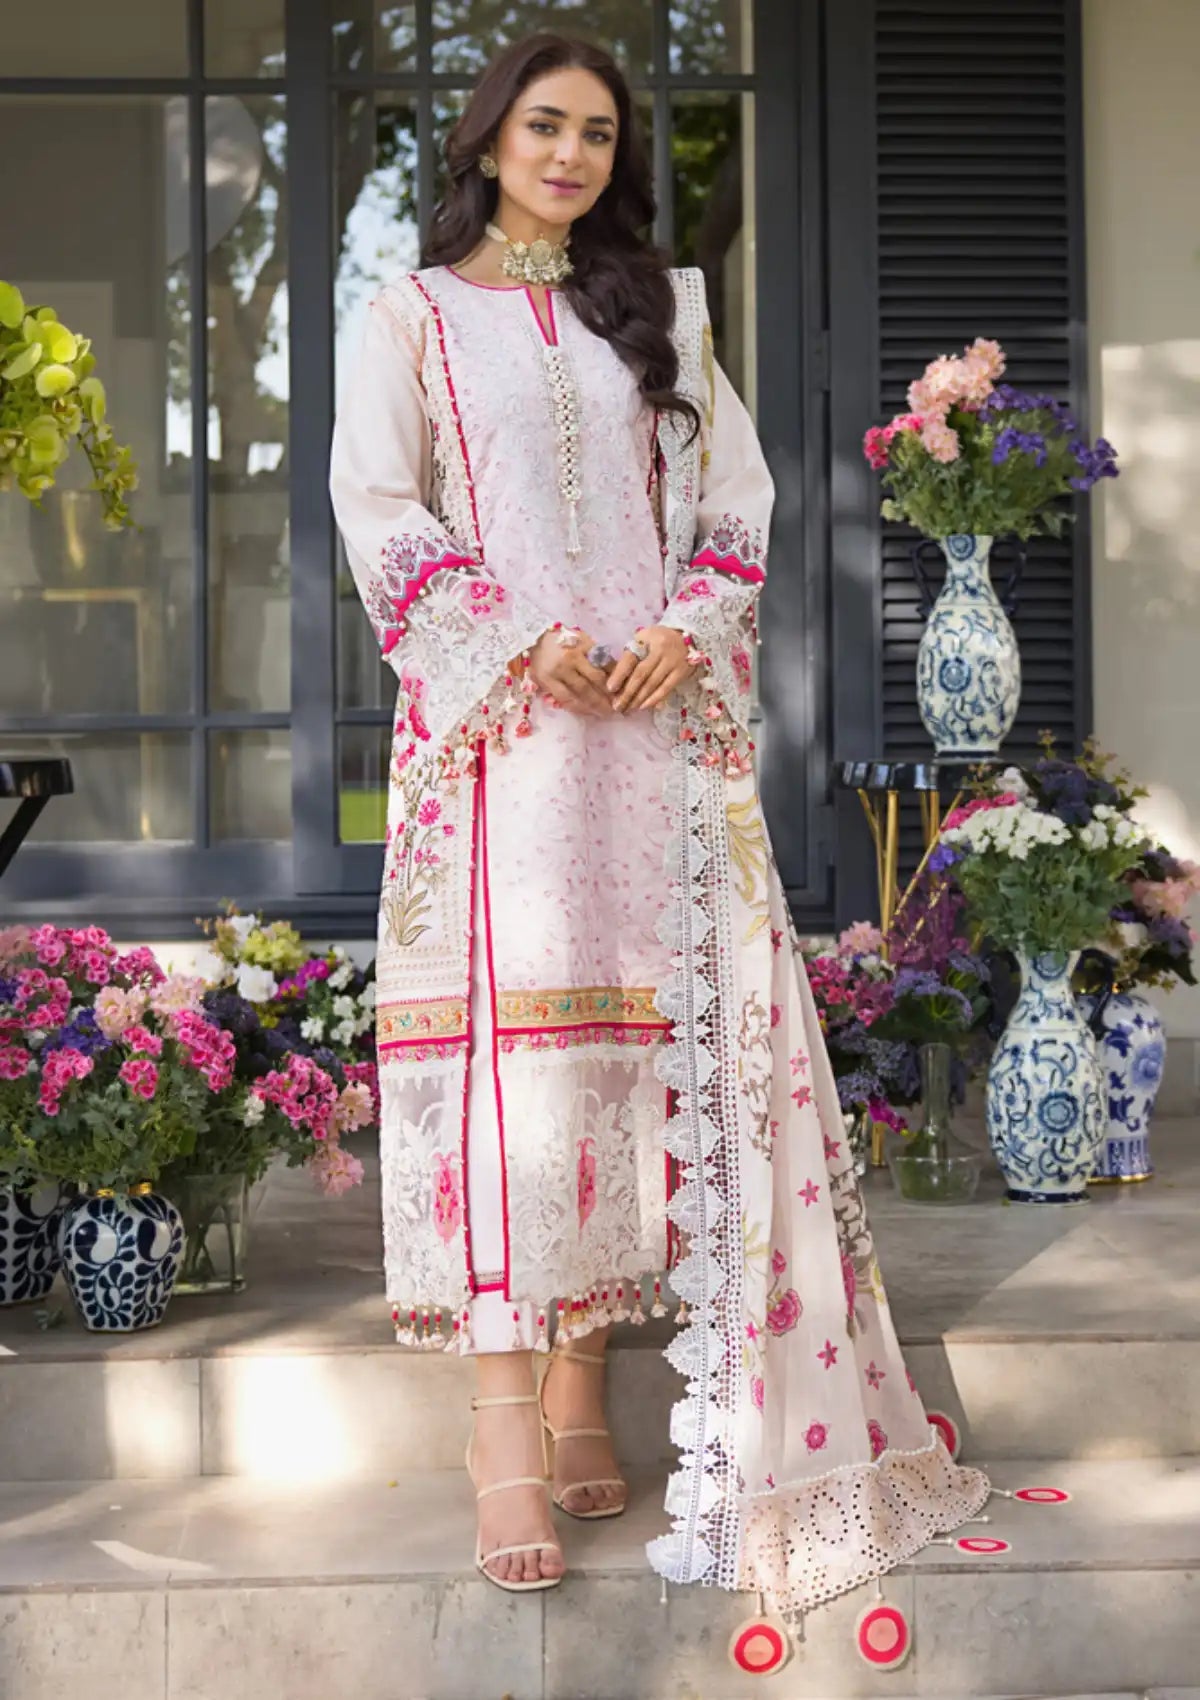 Buy Al Zohaib textile latest collection at Mohsin Saeed Fabrics. high quality and trendy designs Check Price and Shop Online. ✓ Free Shipping ✓ Cash on Delivery ✓ Best women clothing Store